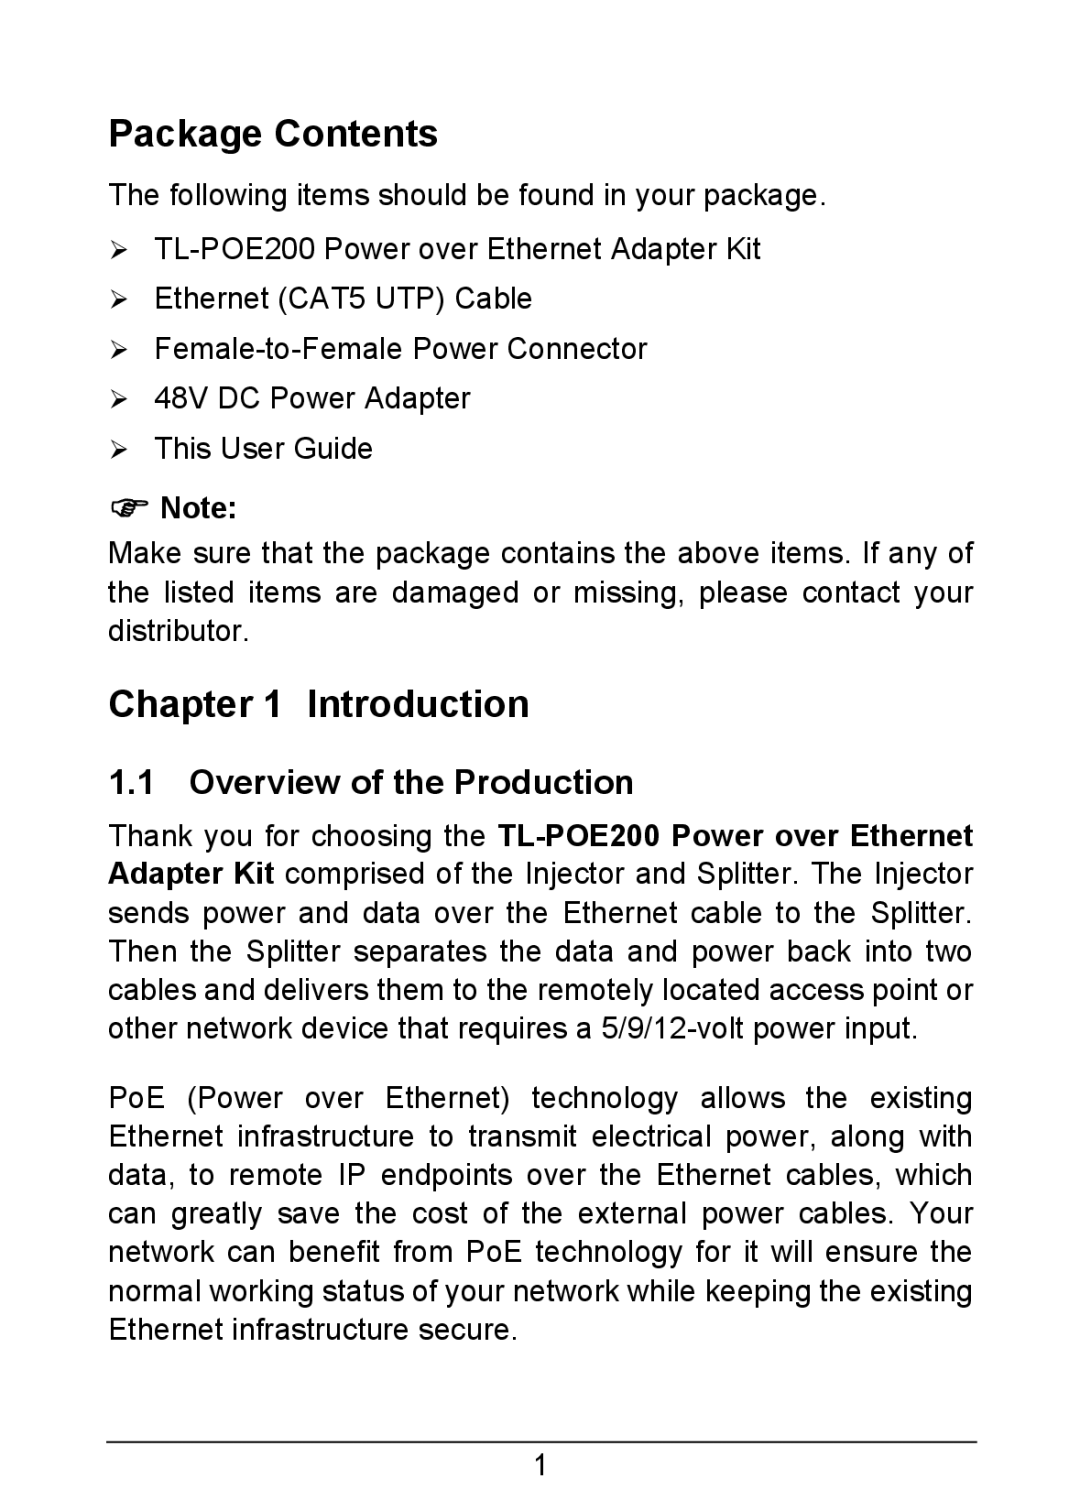 TP-Link TL-POE200 manual Package Contents, Introduction, Overview of the Production 